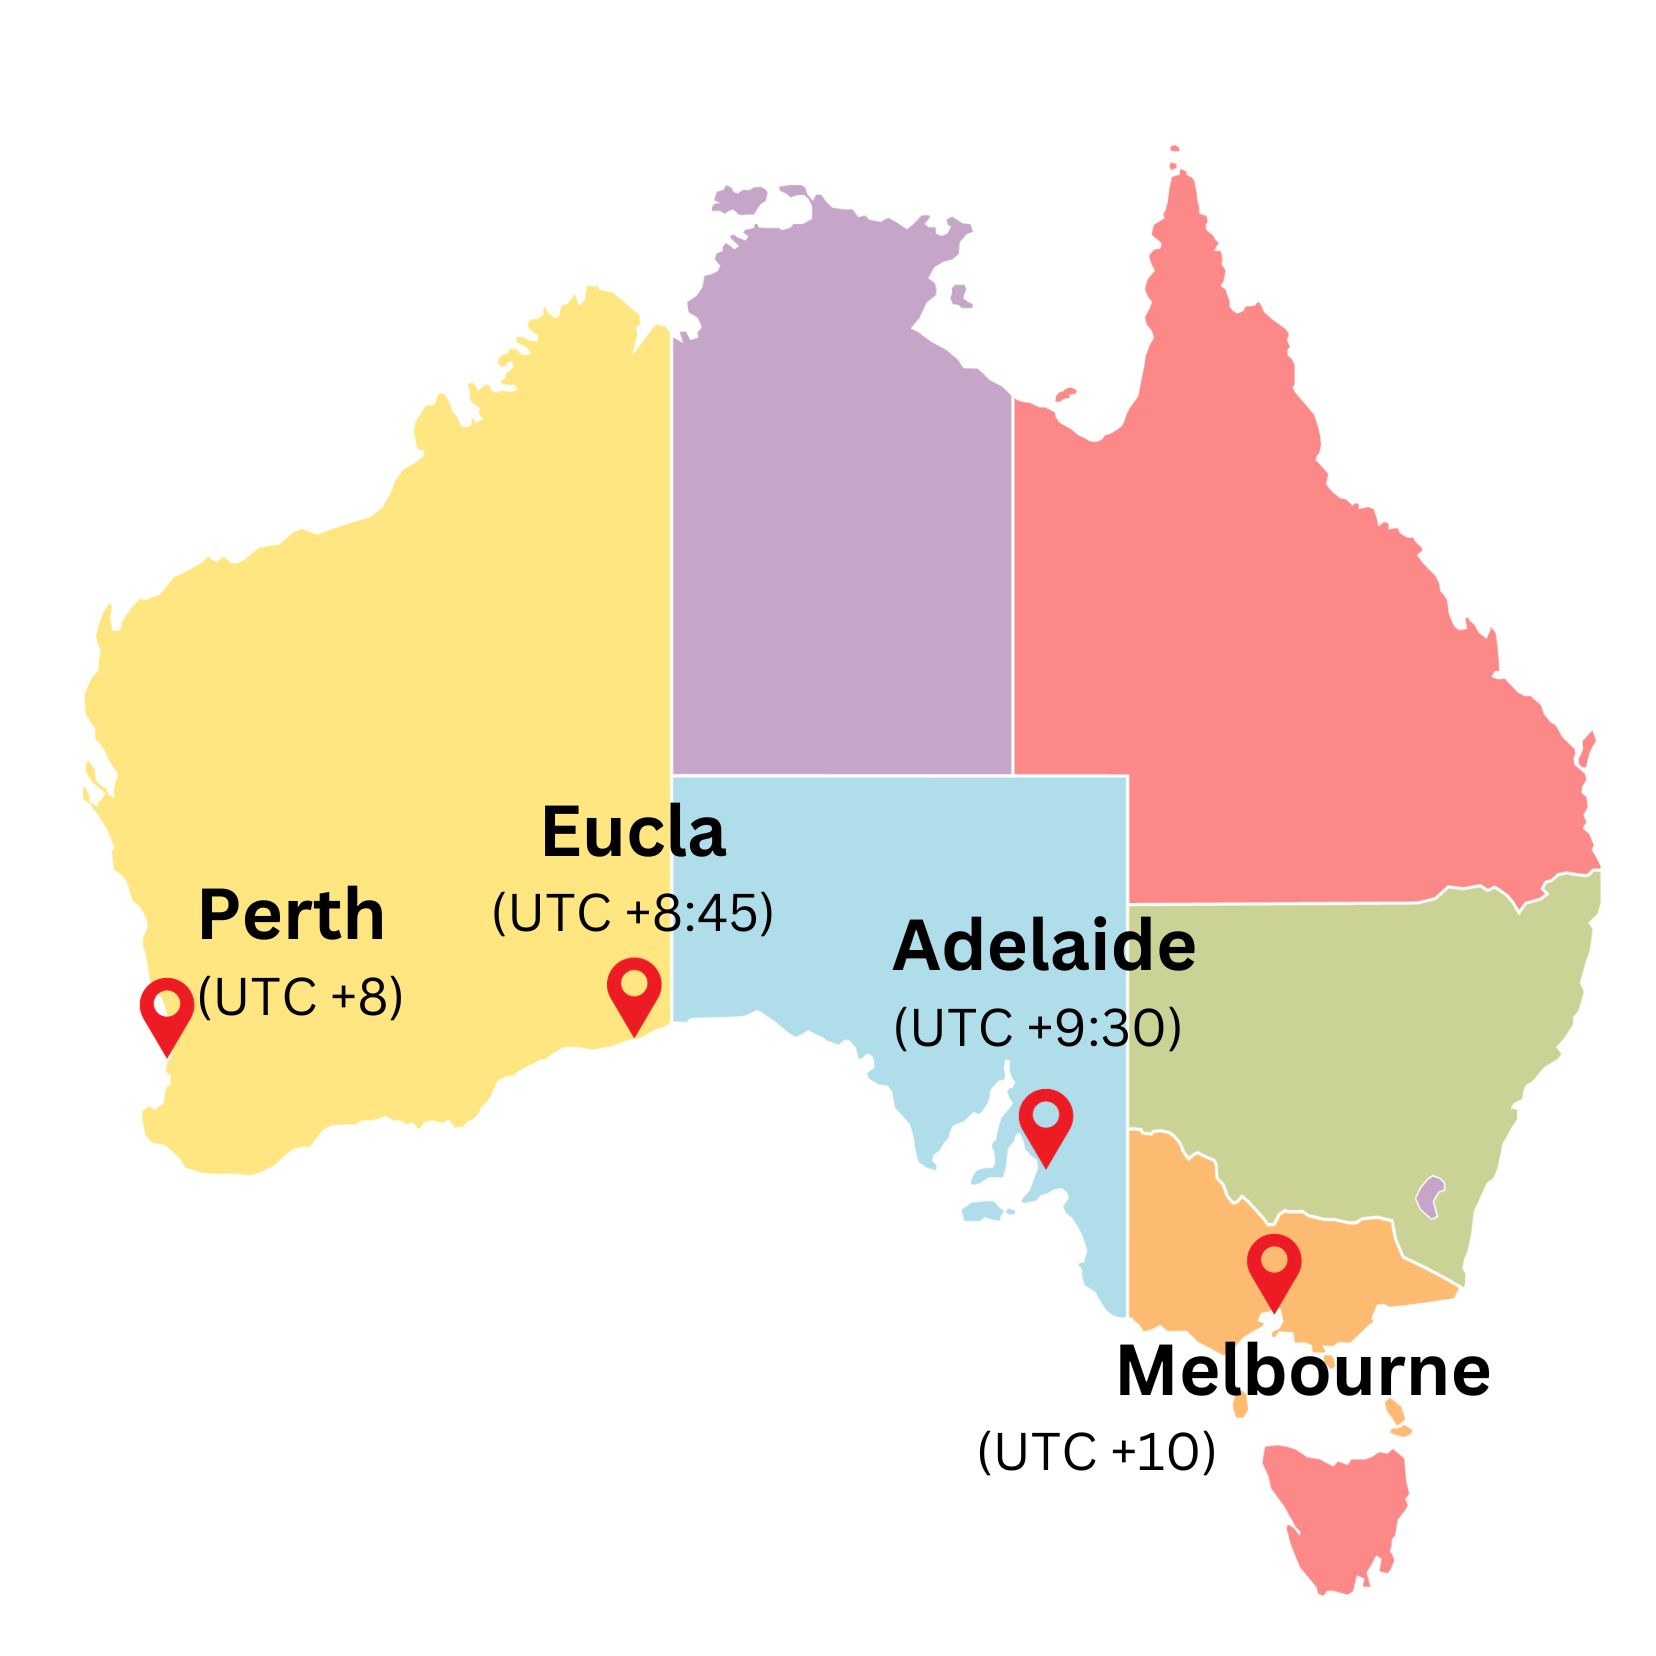 Perth to Melbourne - Timezone changes